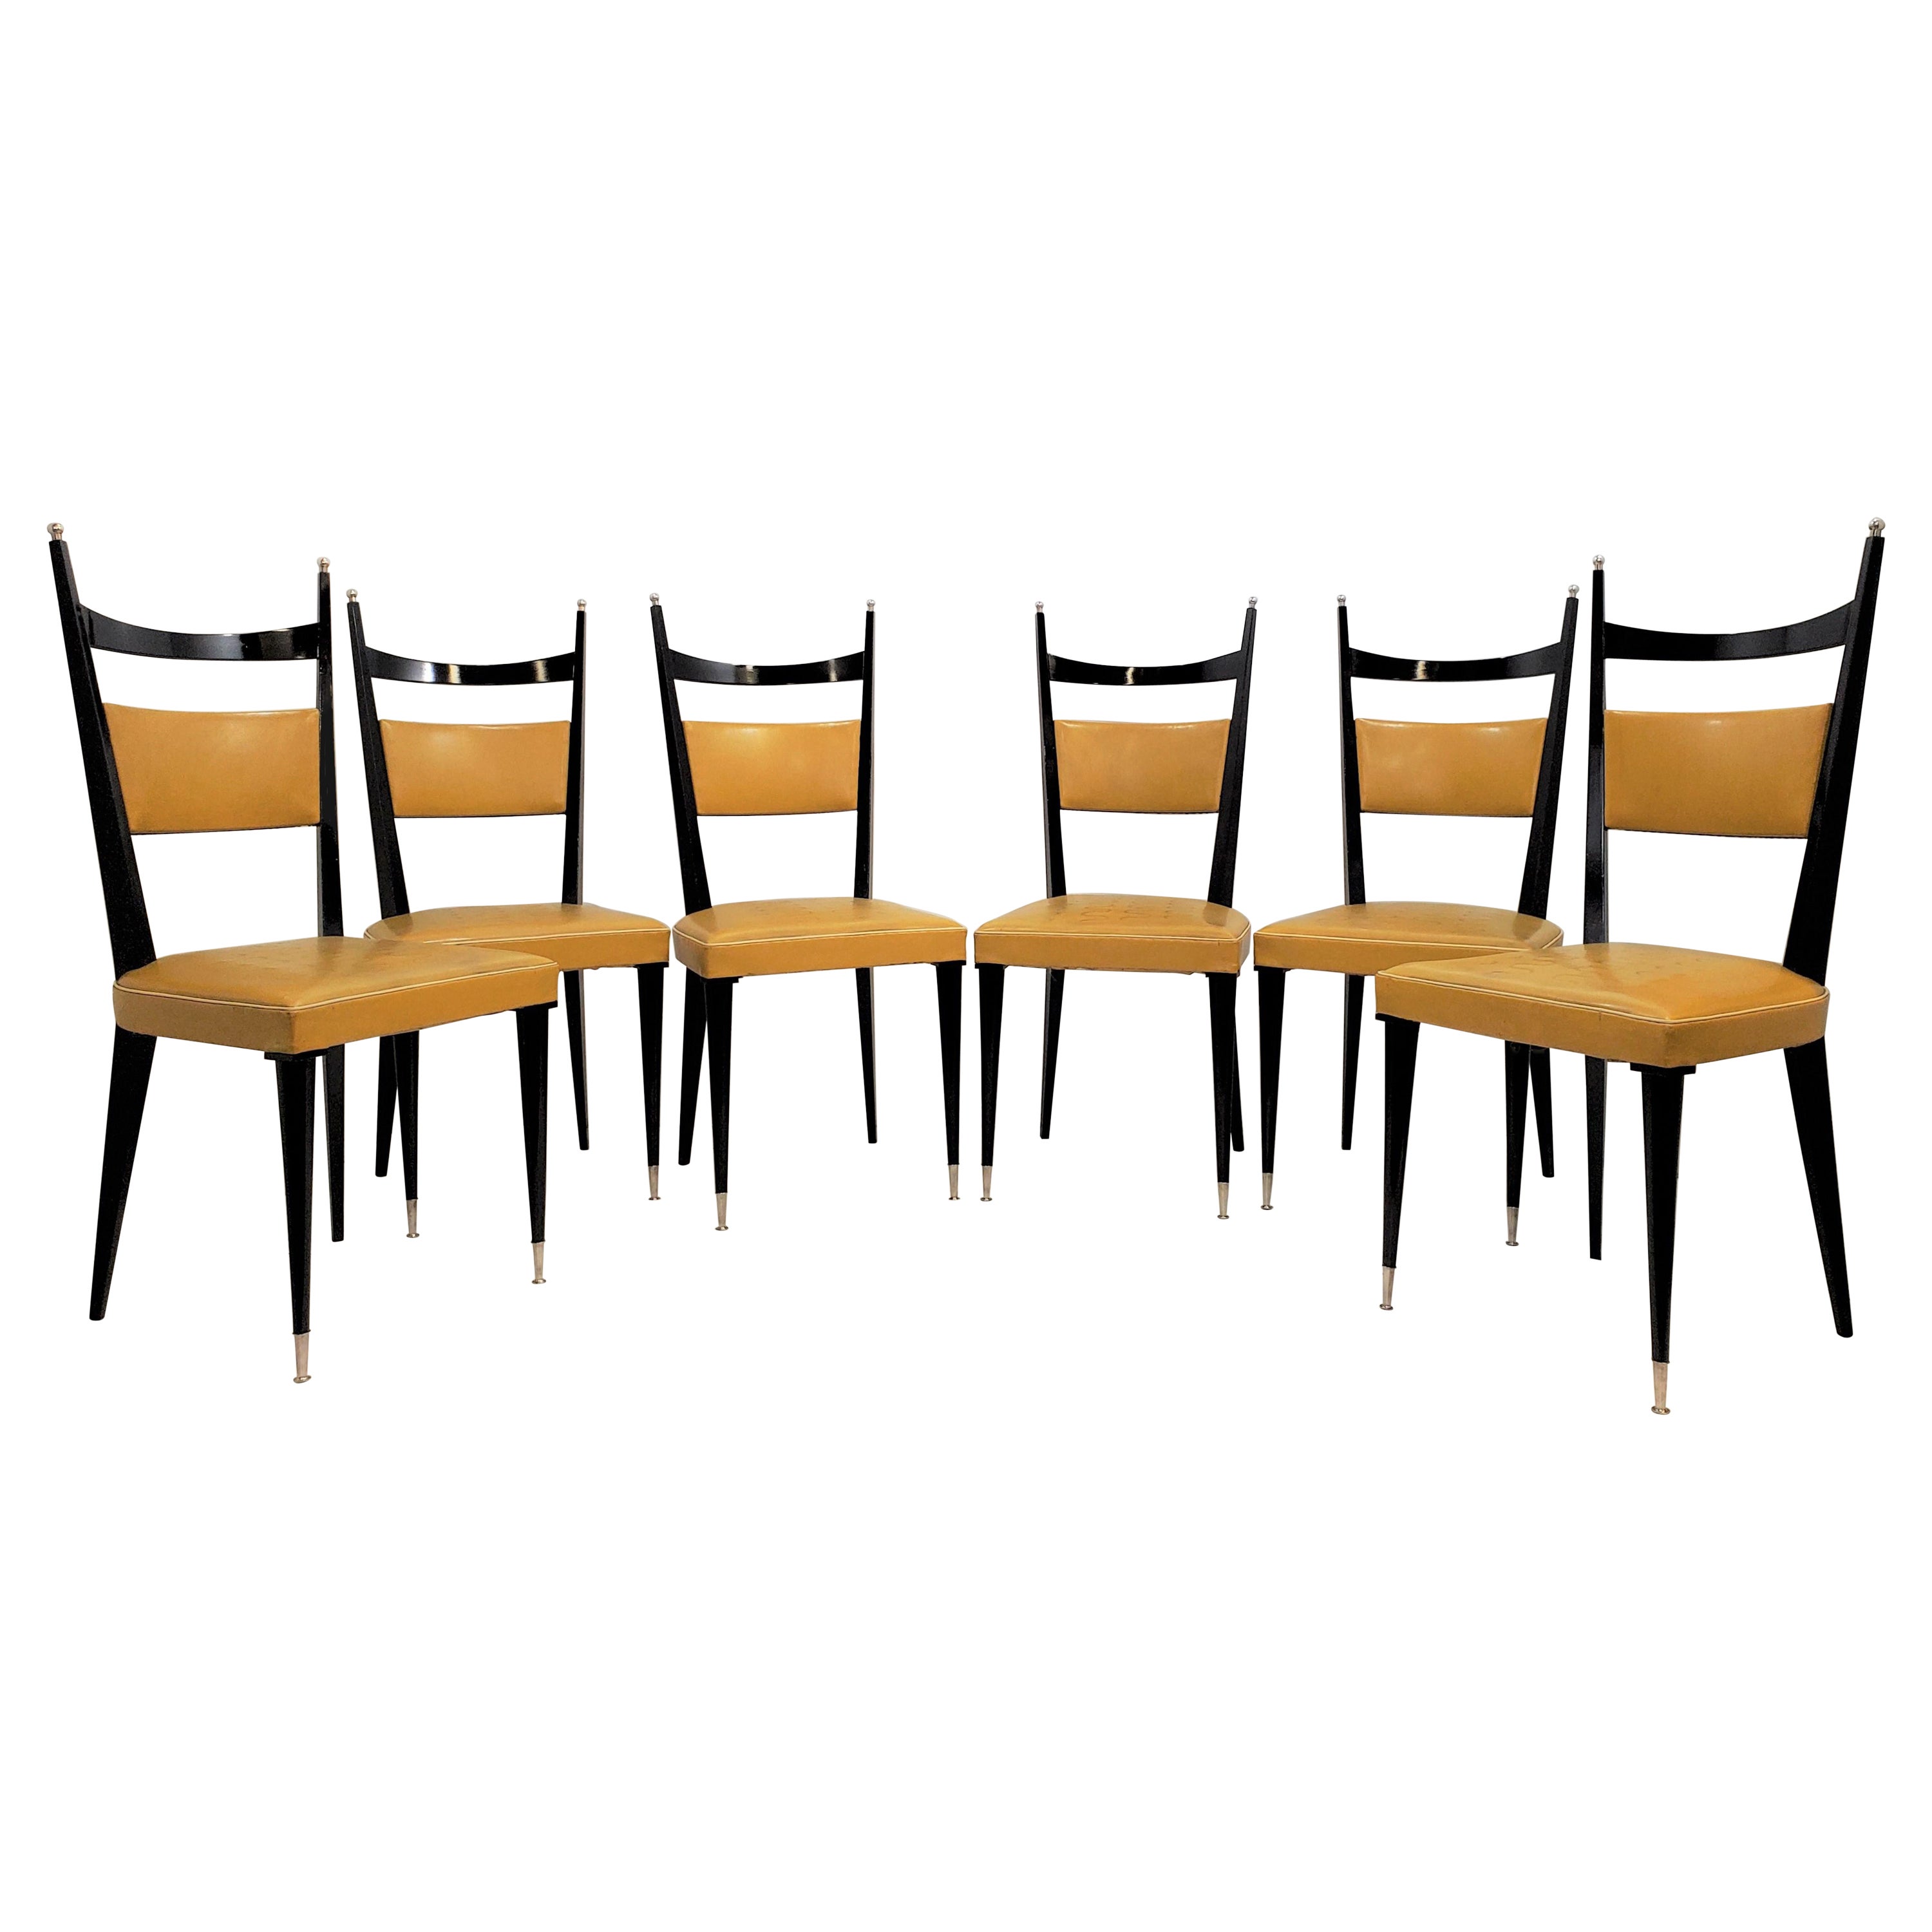 Set of Six Mid-Century Modern Chairs in Ebonized Wood with Nickel Balls & Sabots